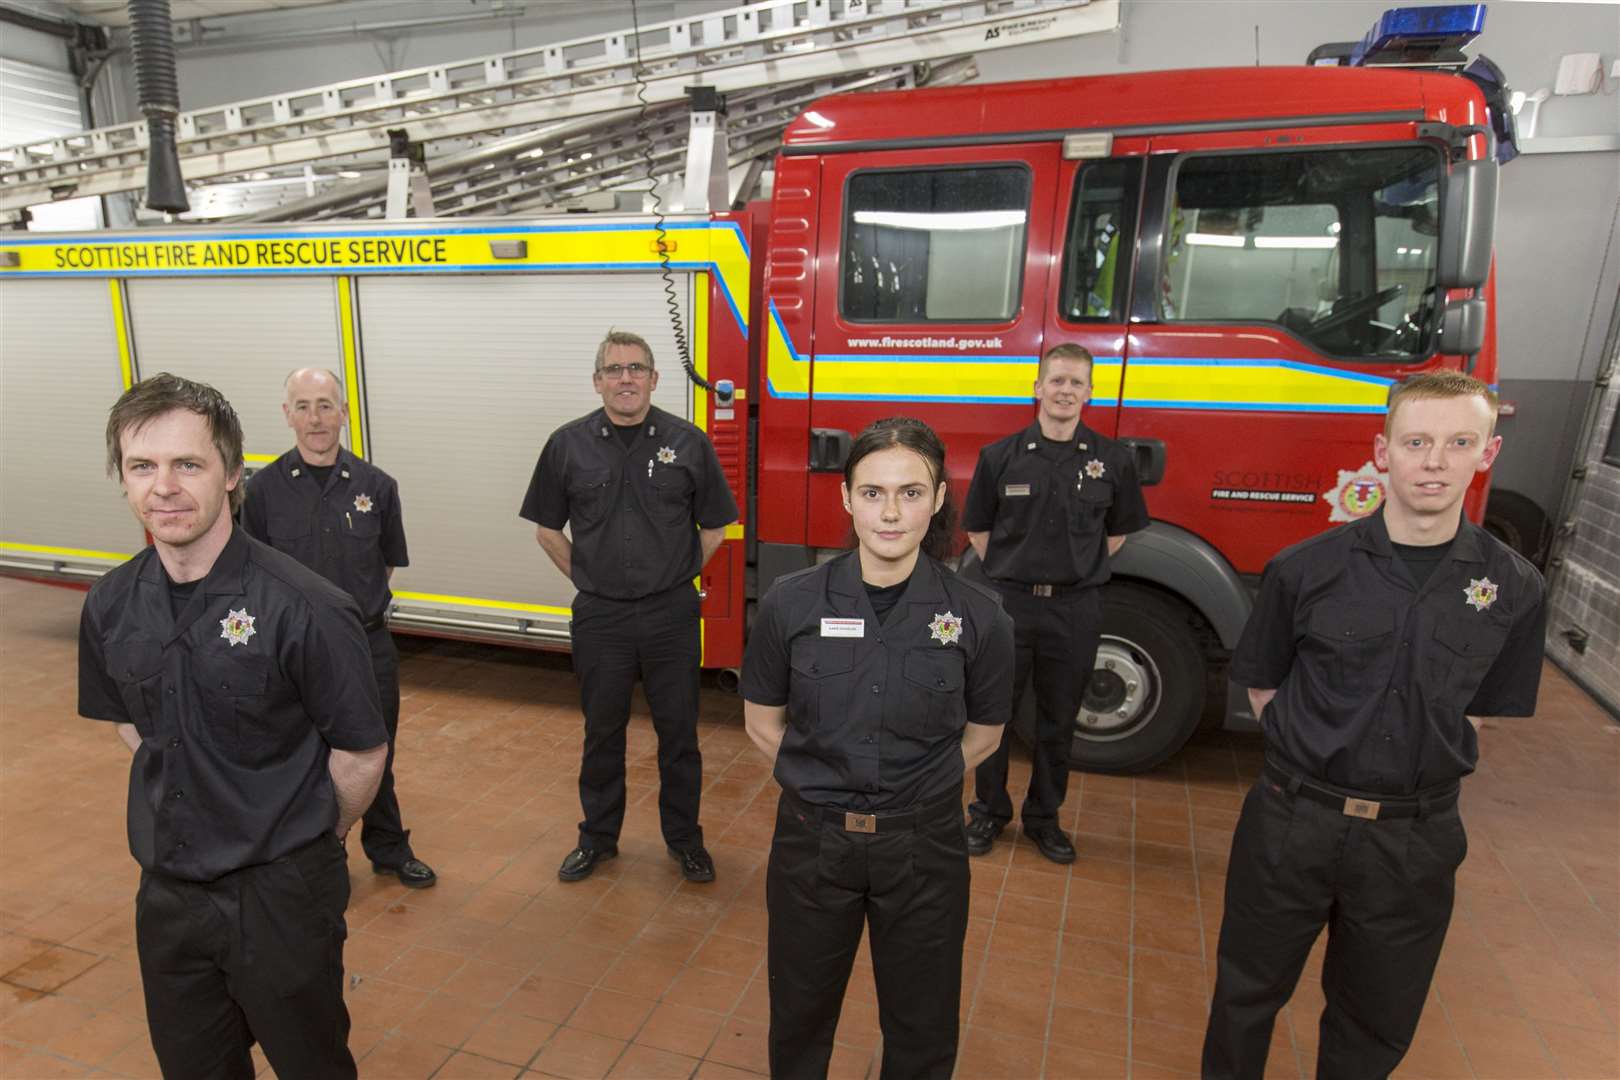 Abbie Douglas, along with her fellow new recruits, Graeme Sinclair (left), and Sean Stewart, pictured with watch commander Colin Gunn (back centre), and crew commanders Hugo Ross (back left), and Graeme Miller, (back right). Picture: Robert Macdonald/Northern Studios.